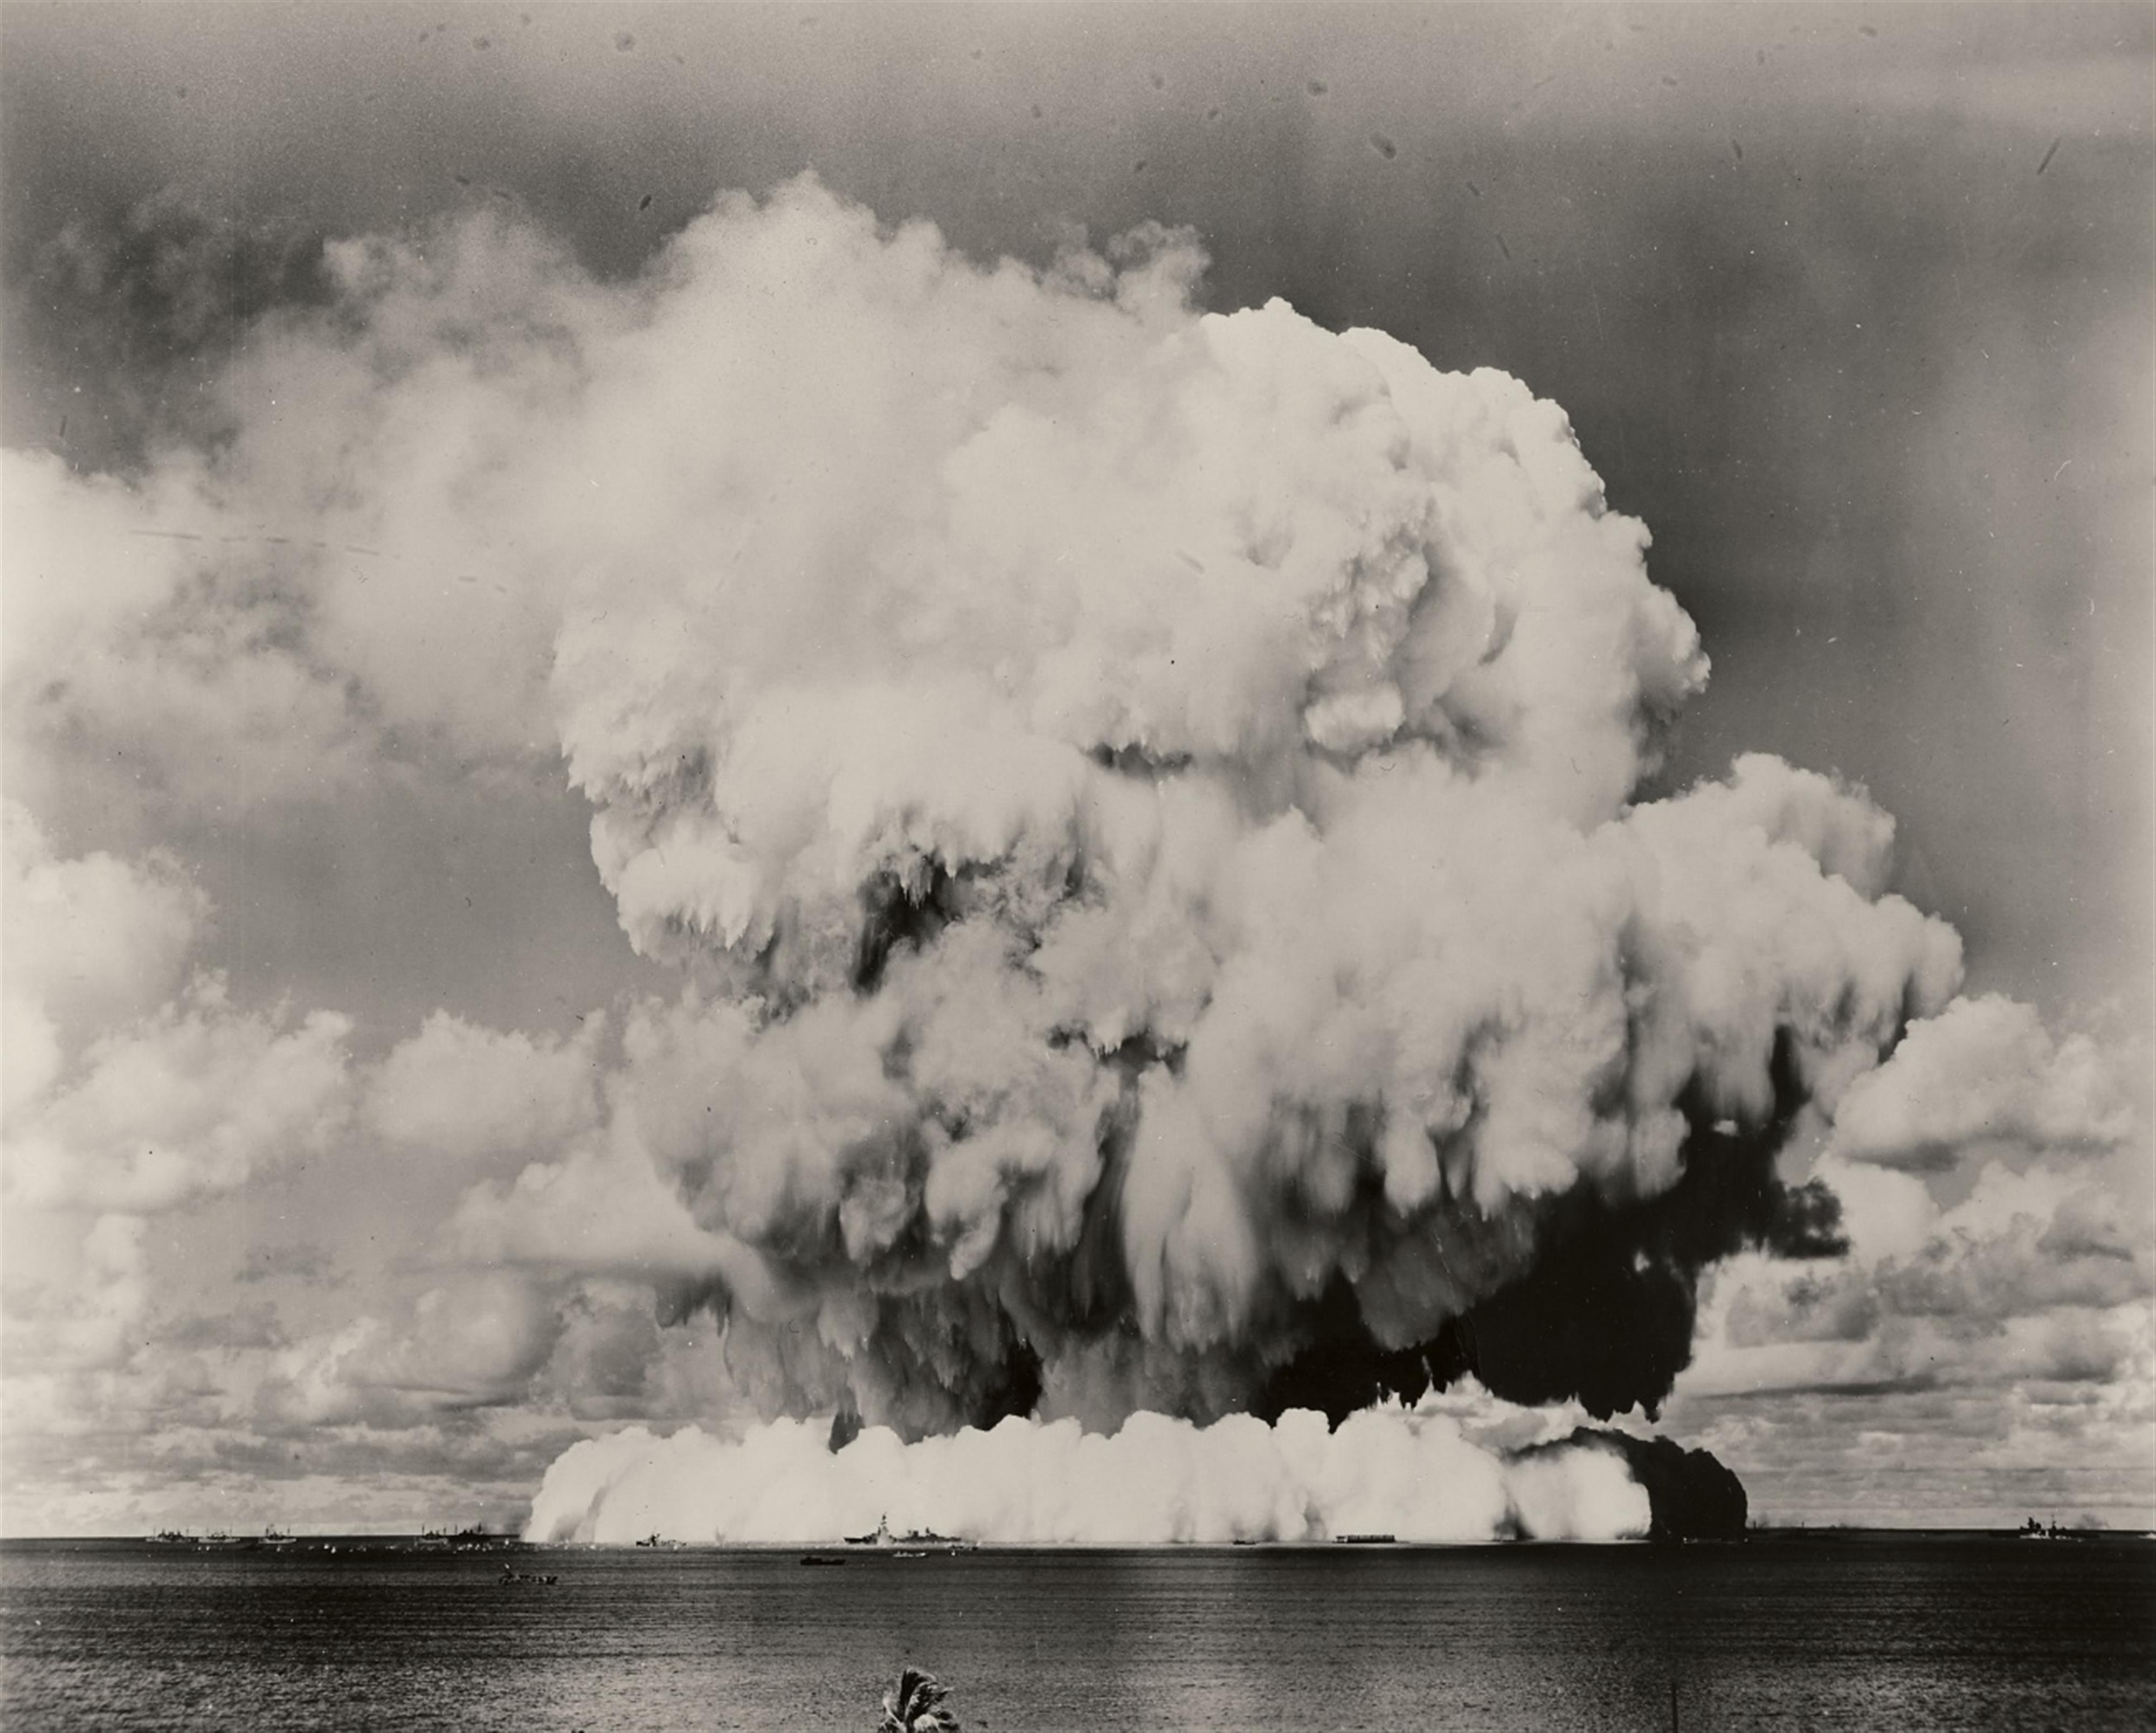 Joint Army Task Force One Photo - "Operation Crossroads" - Views of the Bikini Atoll nuclear Tests - image-19